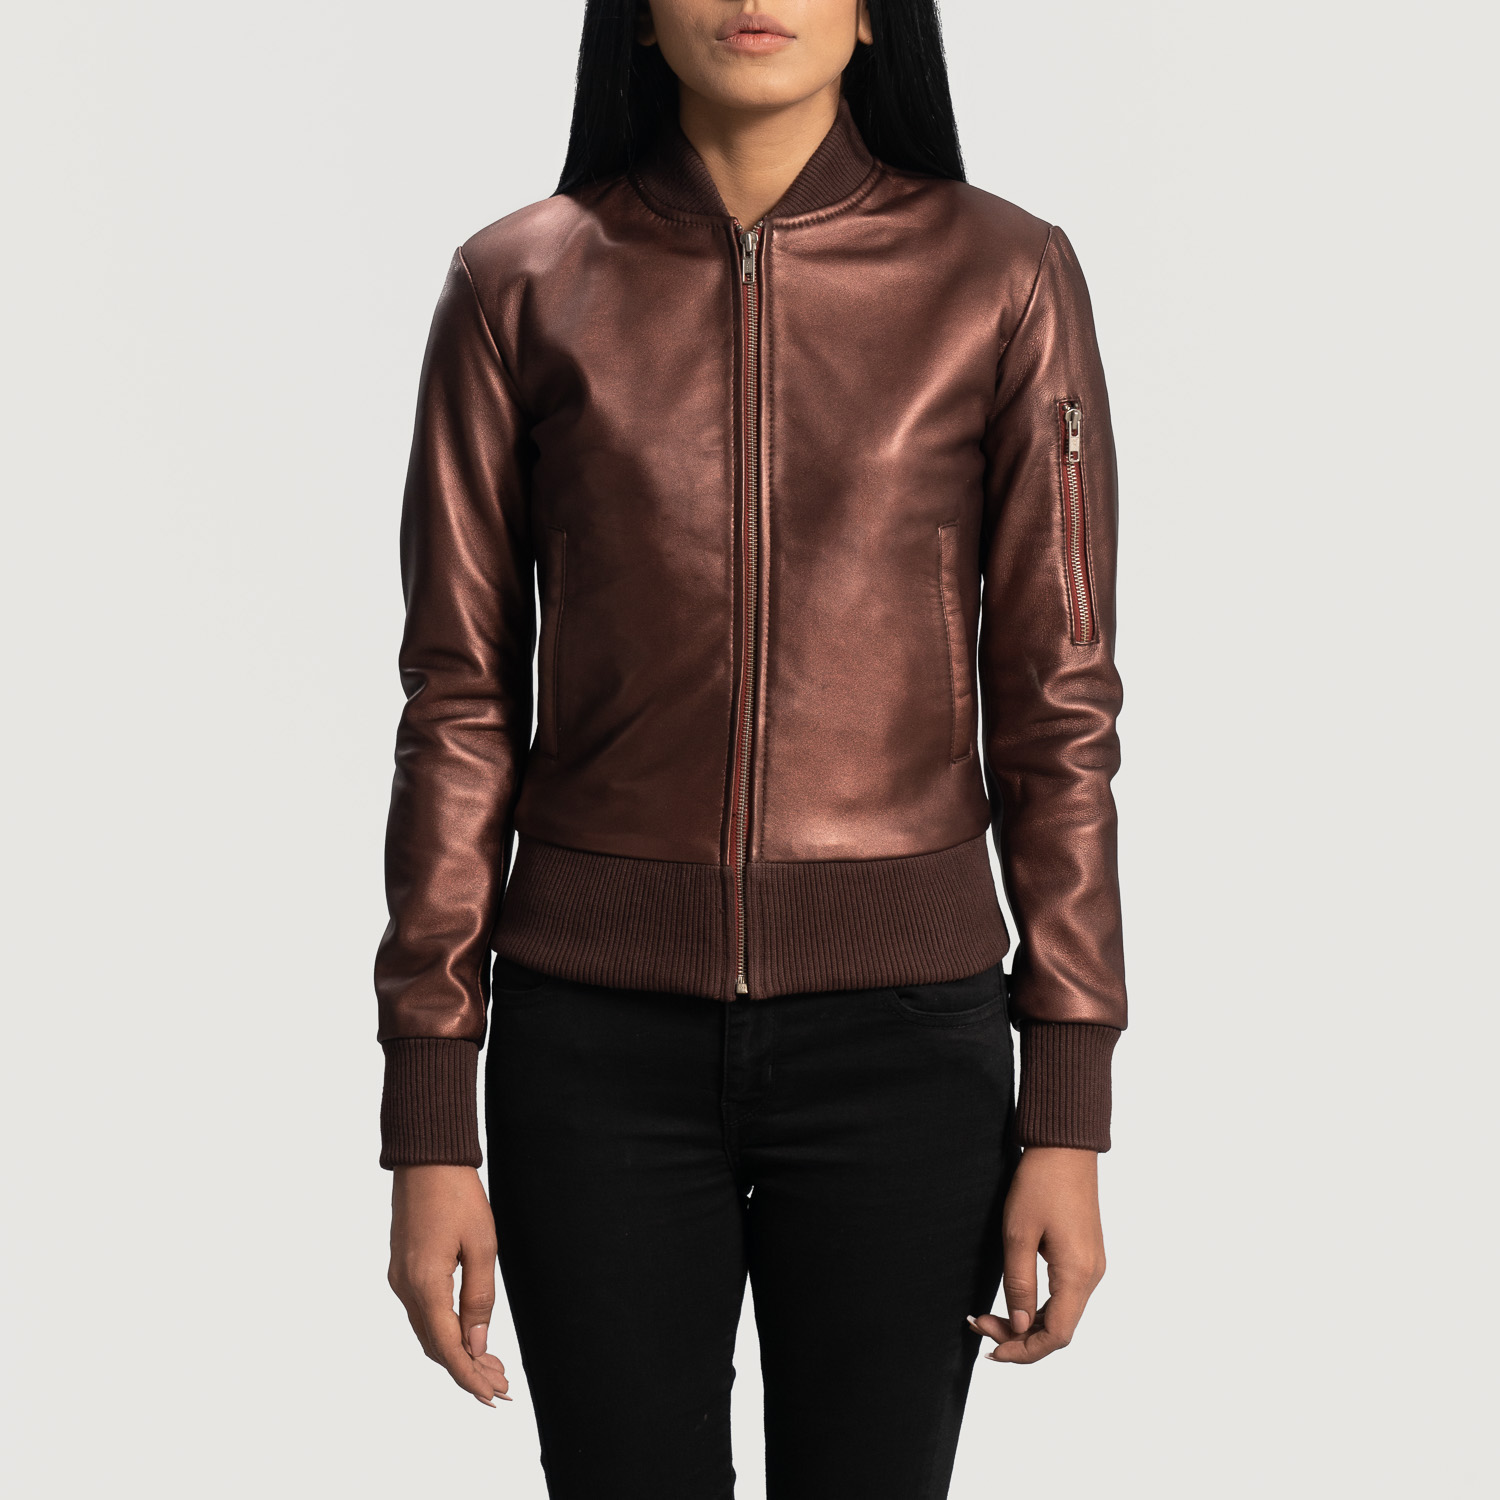 A Metallic Maroon Leather Bomber Jacket By The Jacket Maker